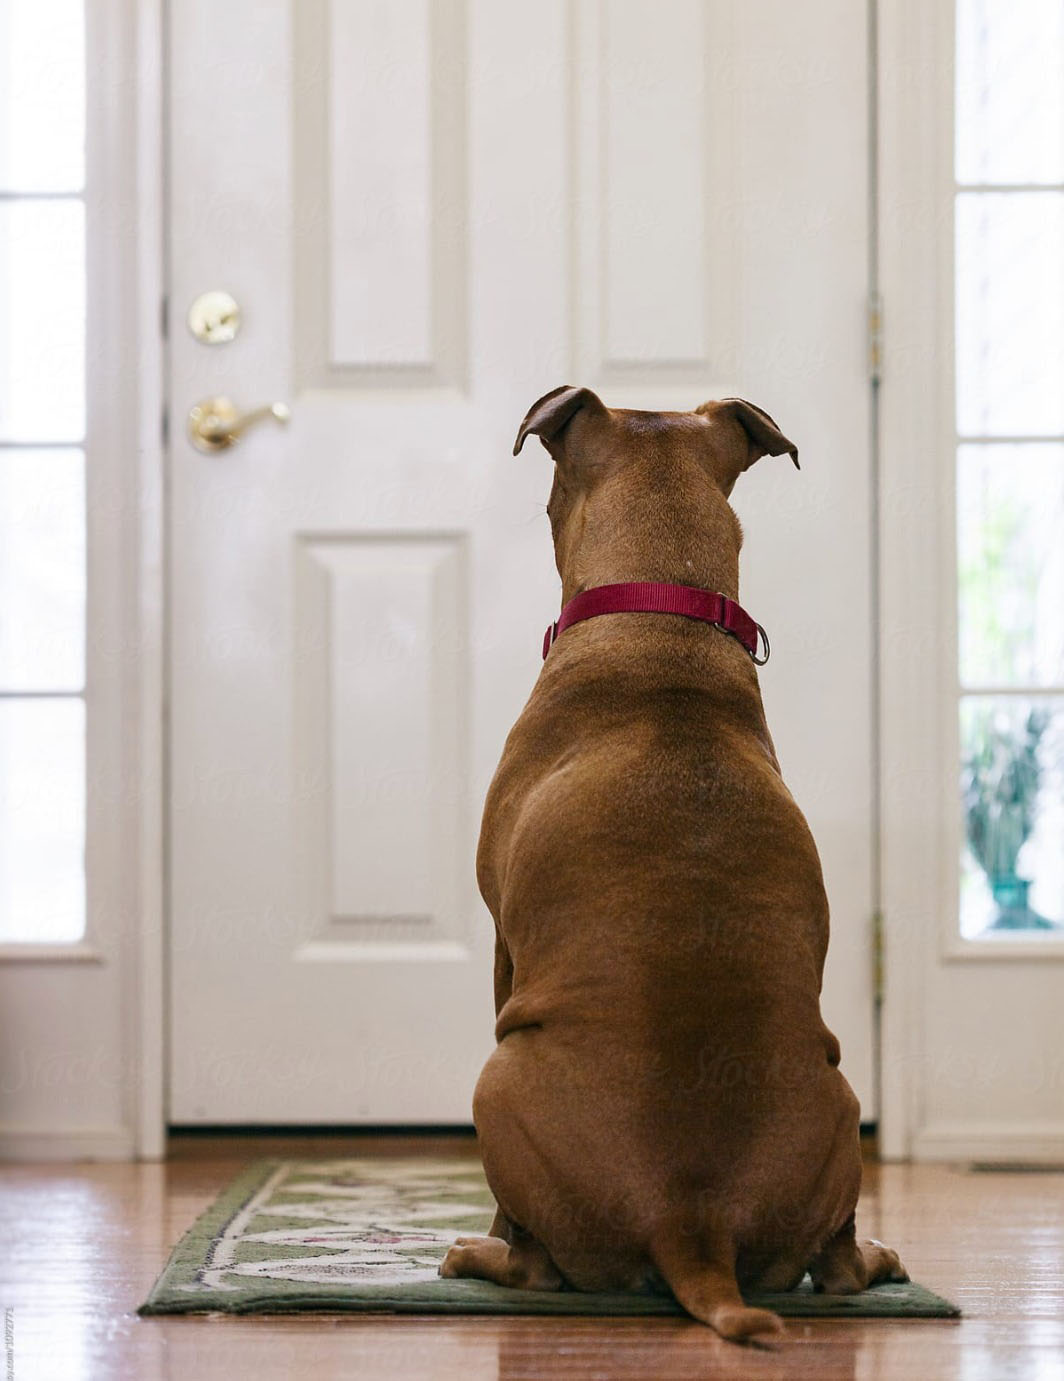 Dogs & Doors – Training Your Dog to Wait at Doors